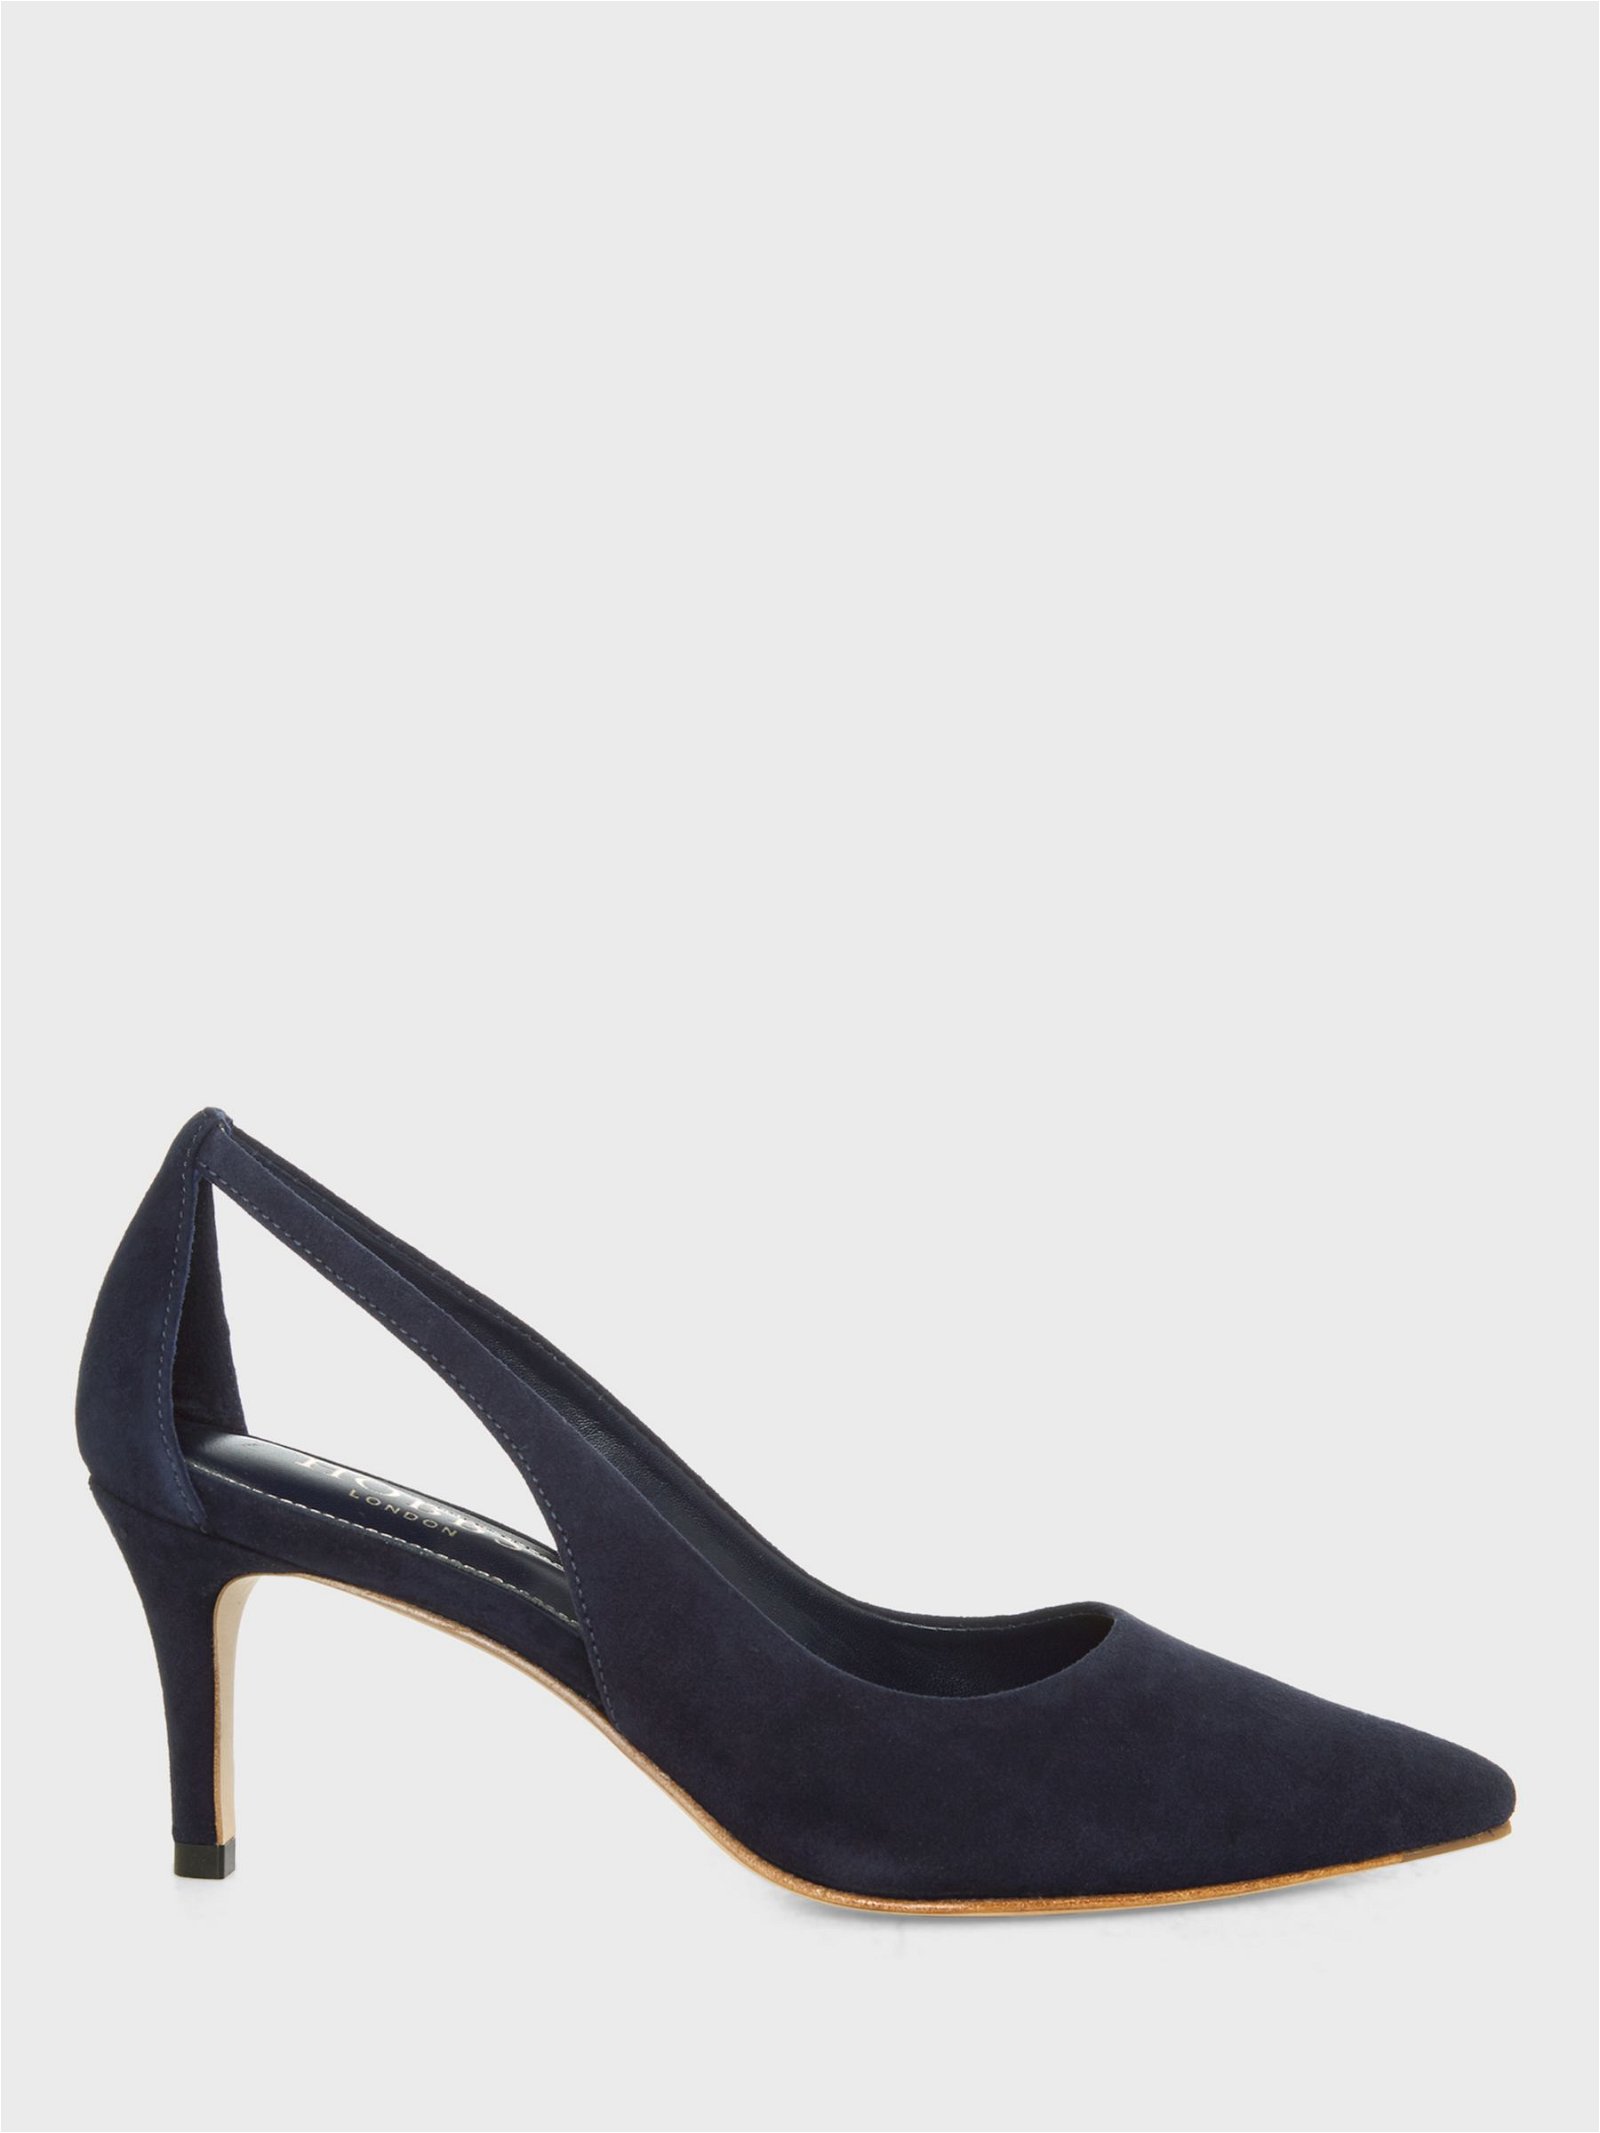 HOBBS Natasha Cut Out Court Shoes in Midnight | Endource